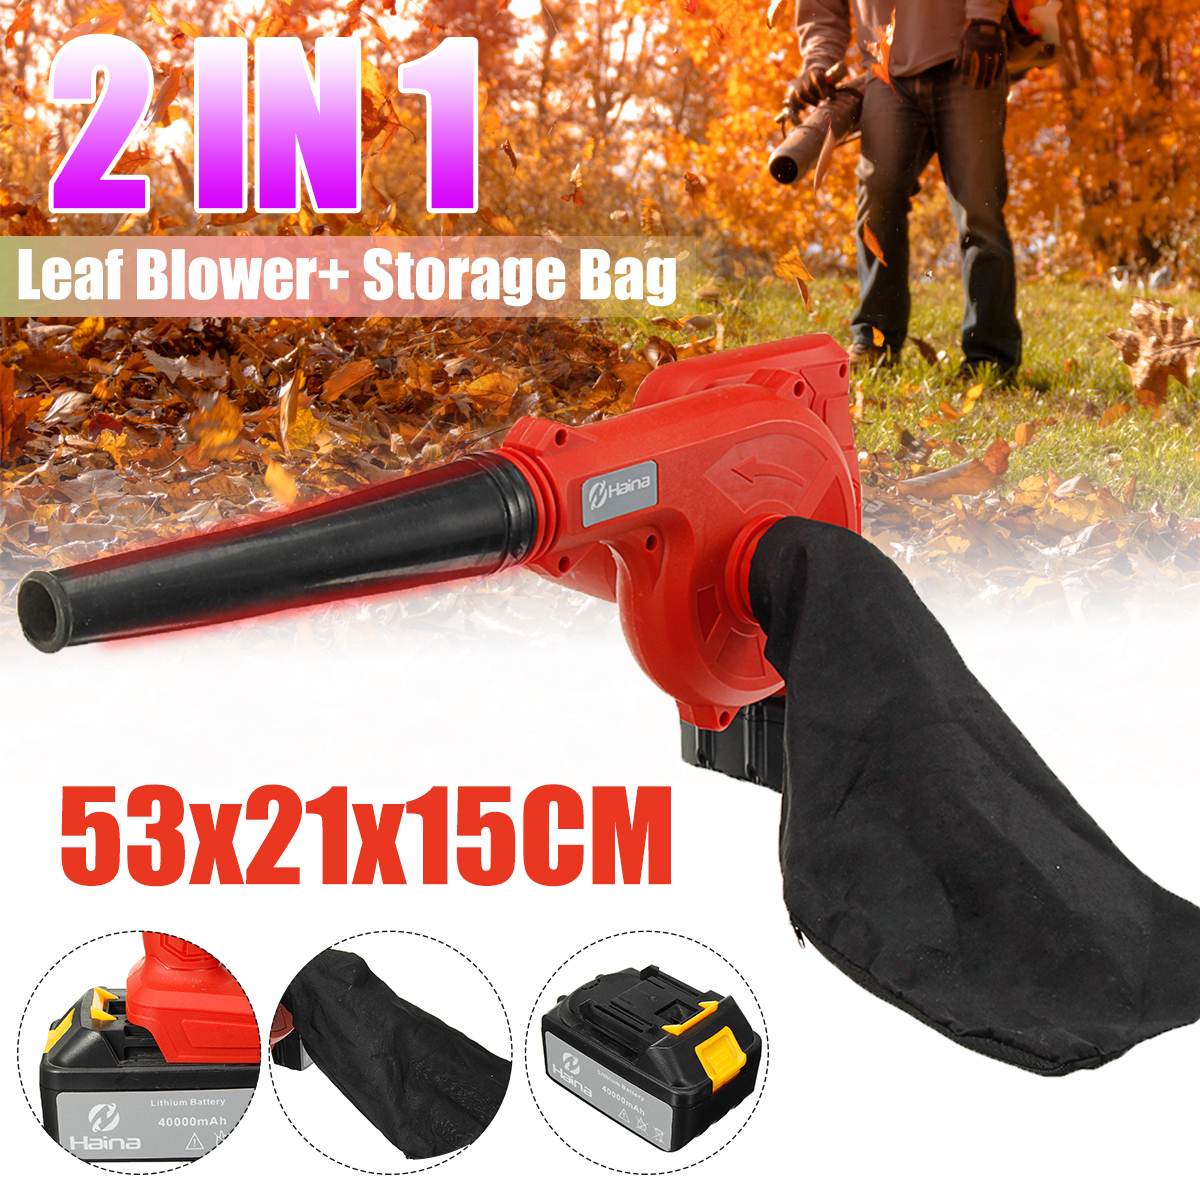 Leaf-Blower-Outdoor-Grass-Blower-Garden-Handheld-Electric-Battery-Tool-Waste-Collection-Bag-1653882